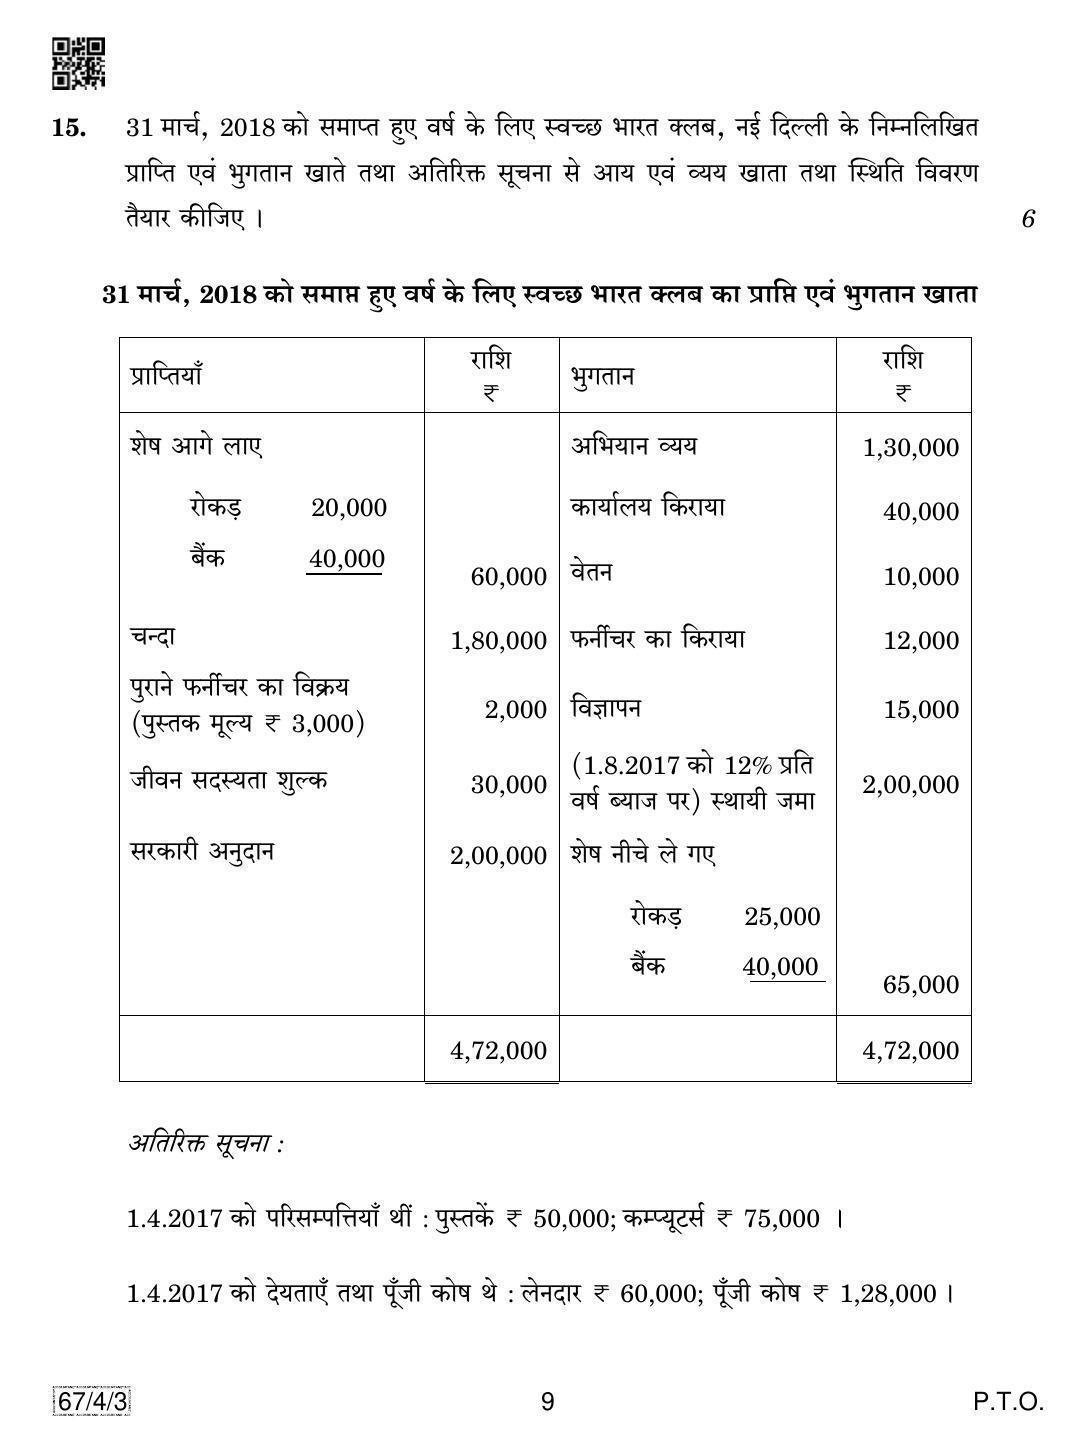 CBSE Class 12 67-4-3 Accountancy 2019 Question Paper - Page 9